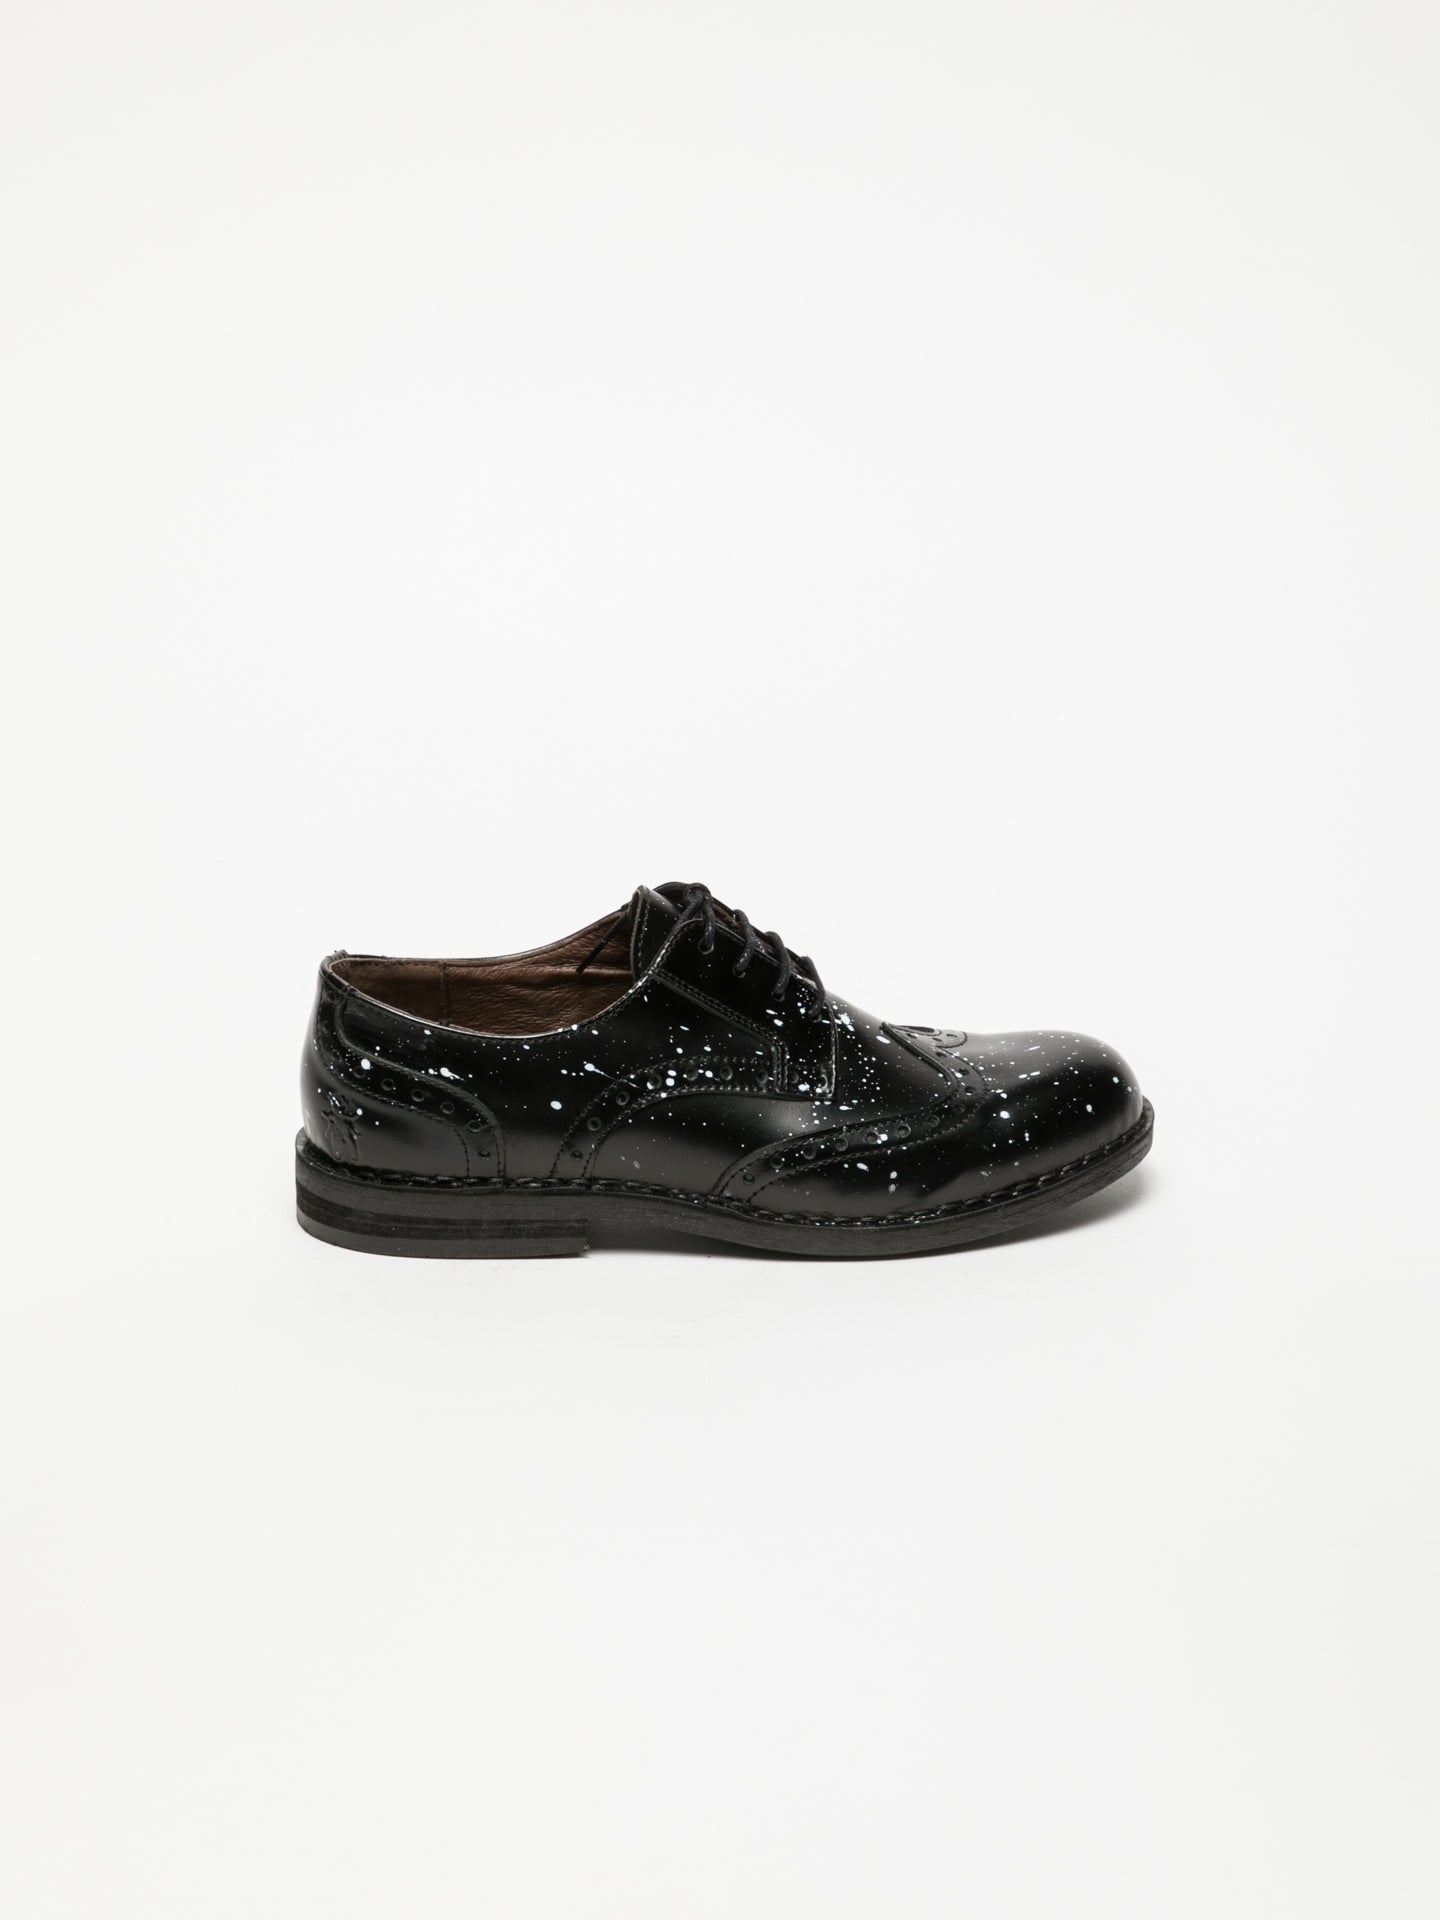 Fly London Black Derby Shoes